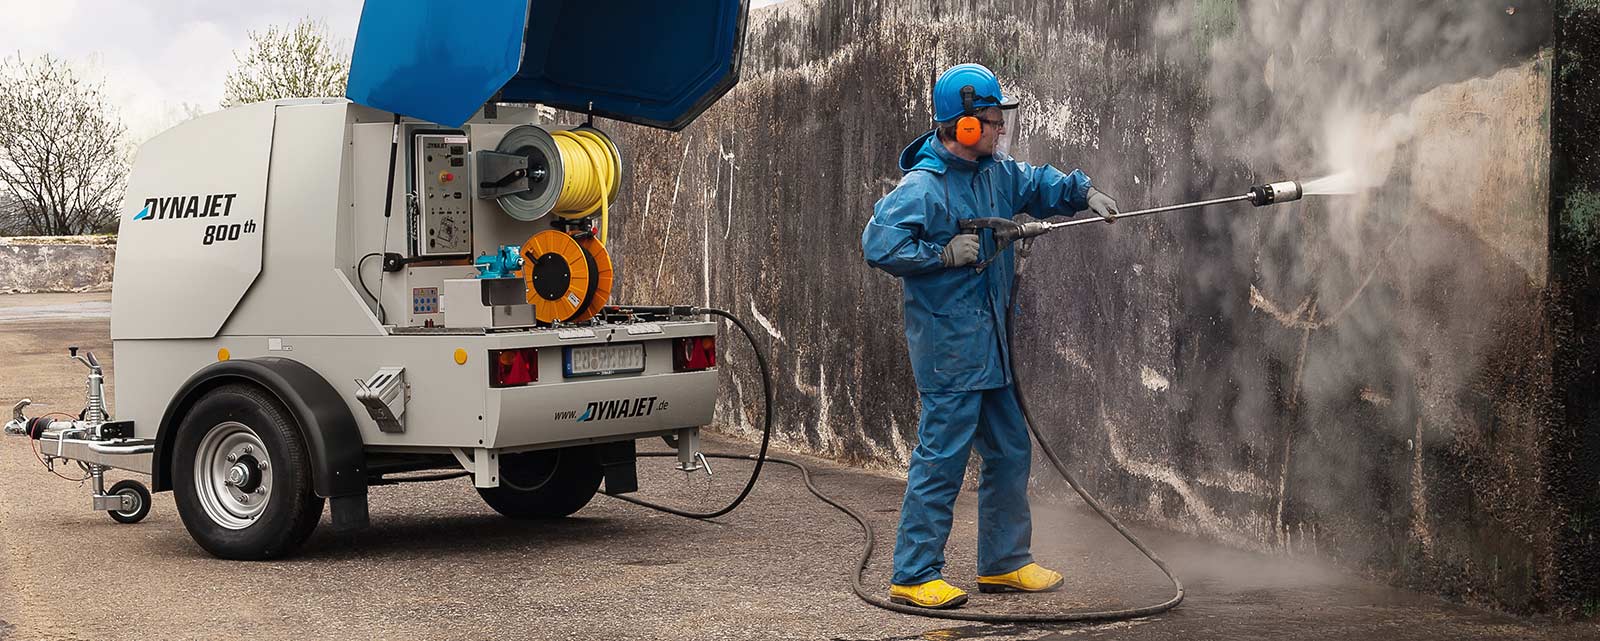 Renovation with high-pressure cleaner